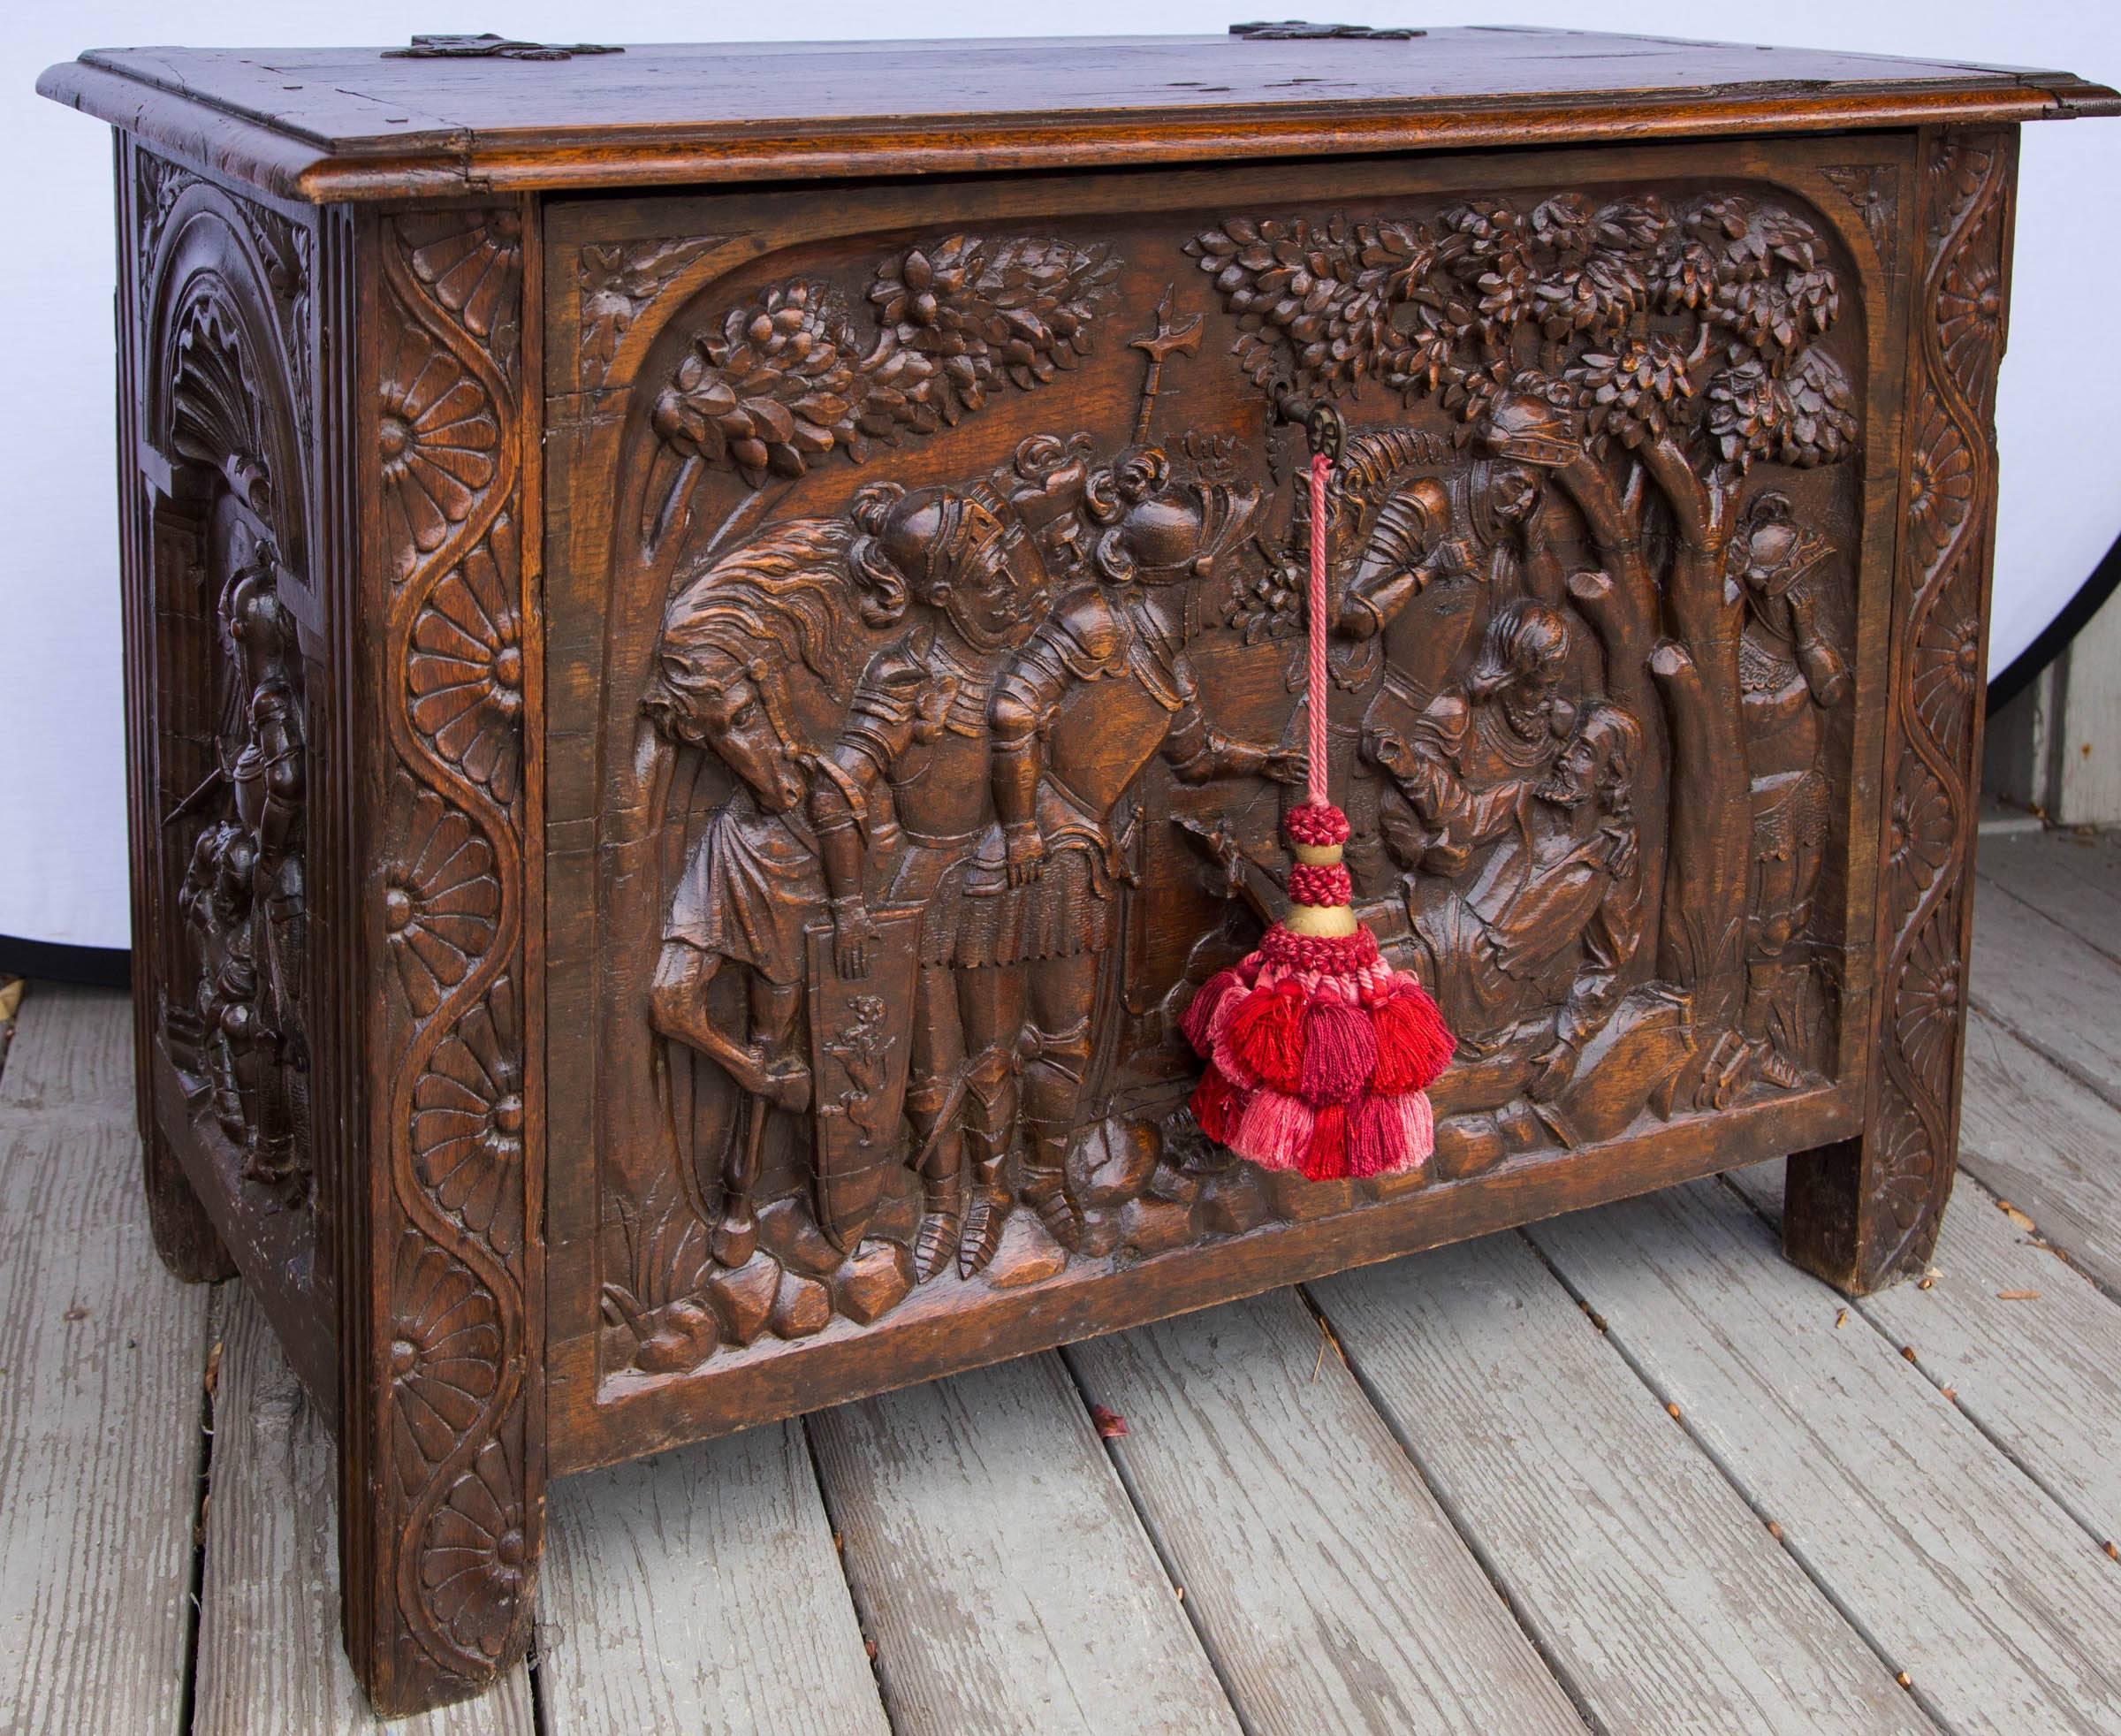 This amazing coffer is hand-carved in deep relief. The iron hardware is all original, as is the lock. Inside the lid is a paper, handwritten with the following inscription:

